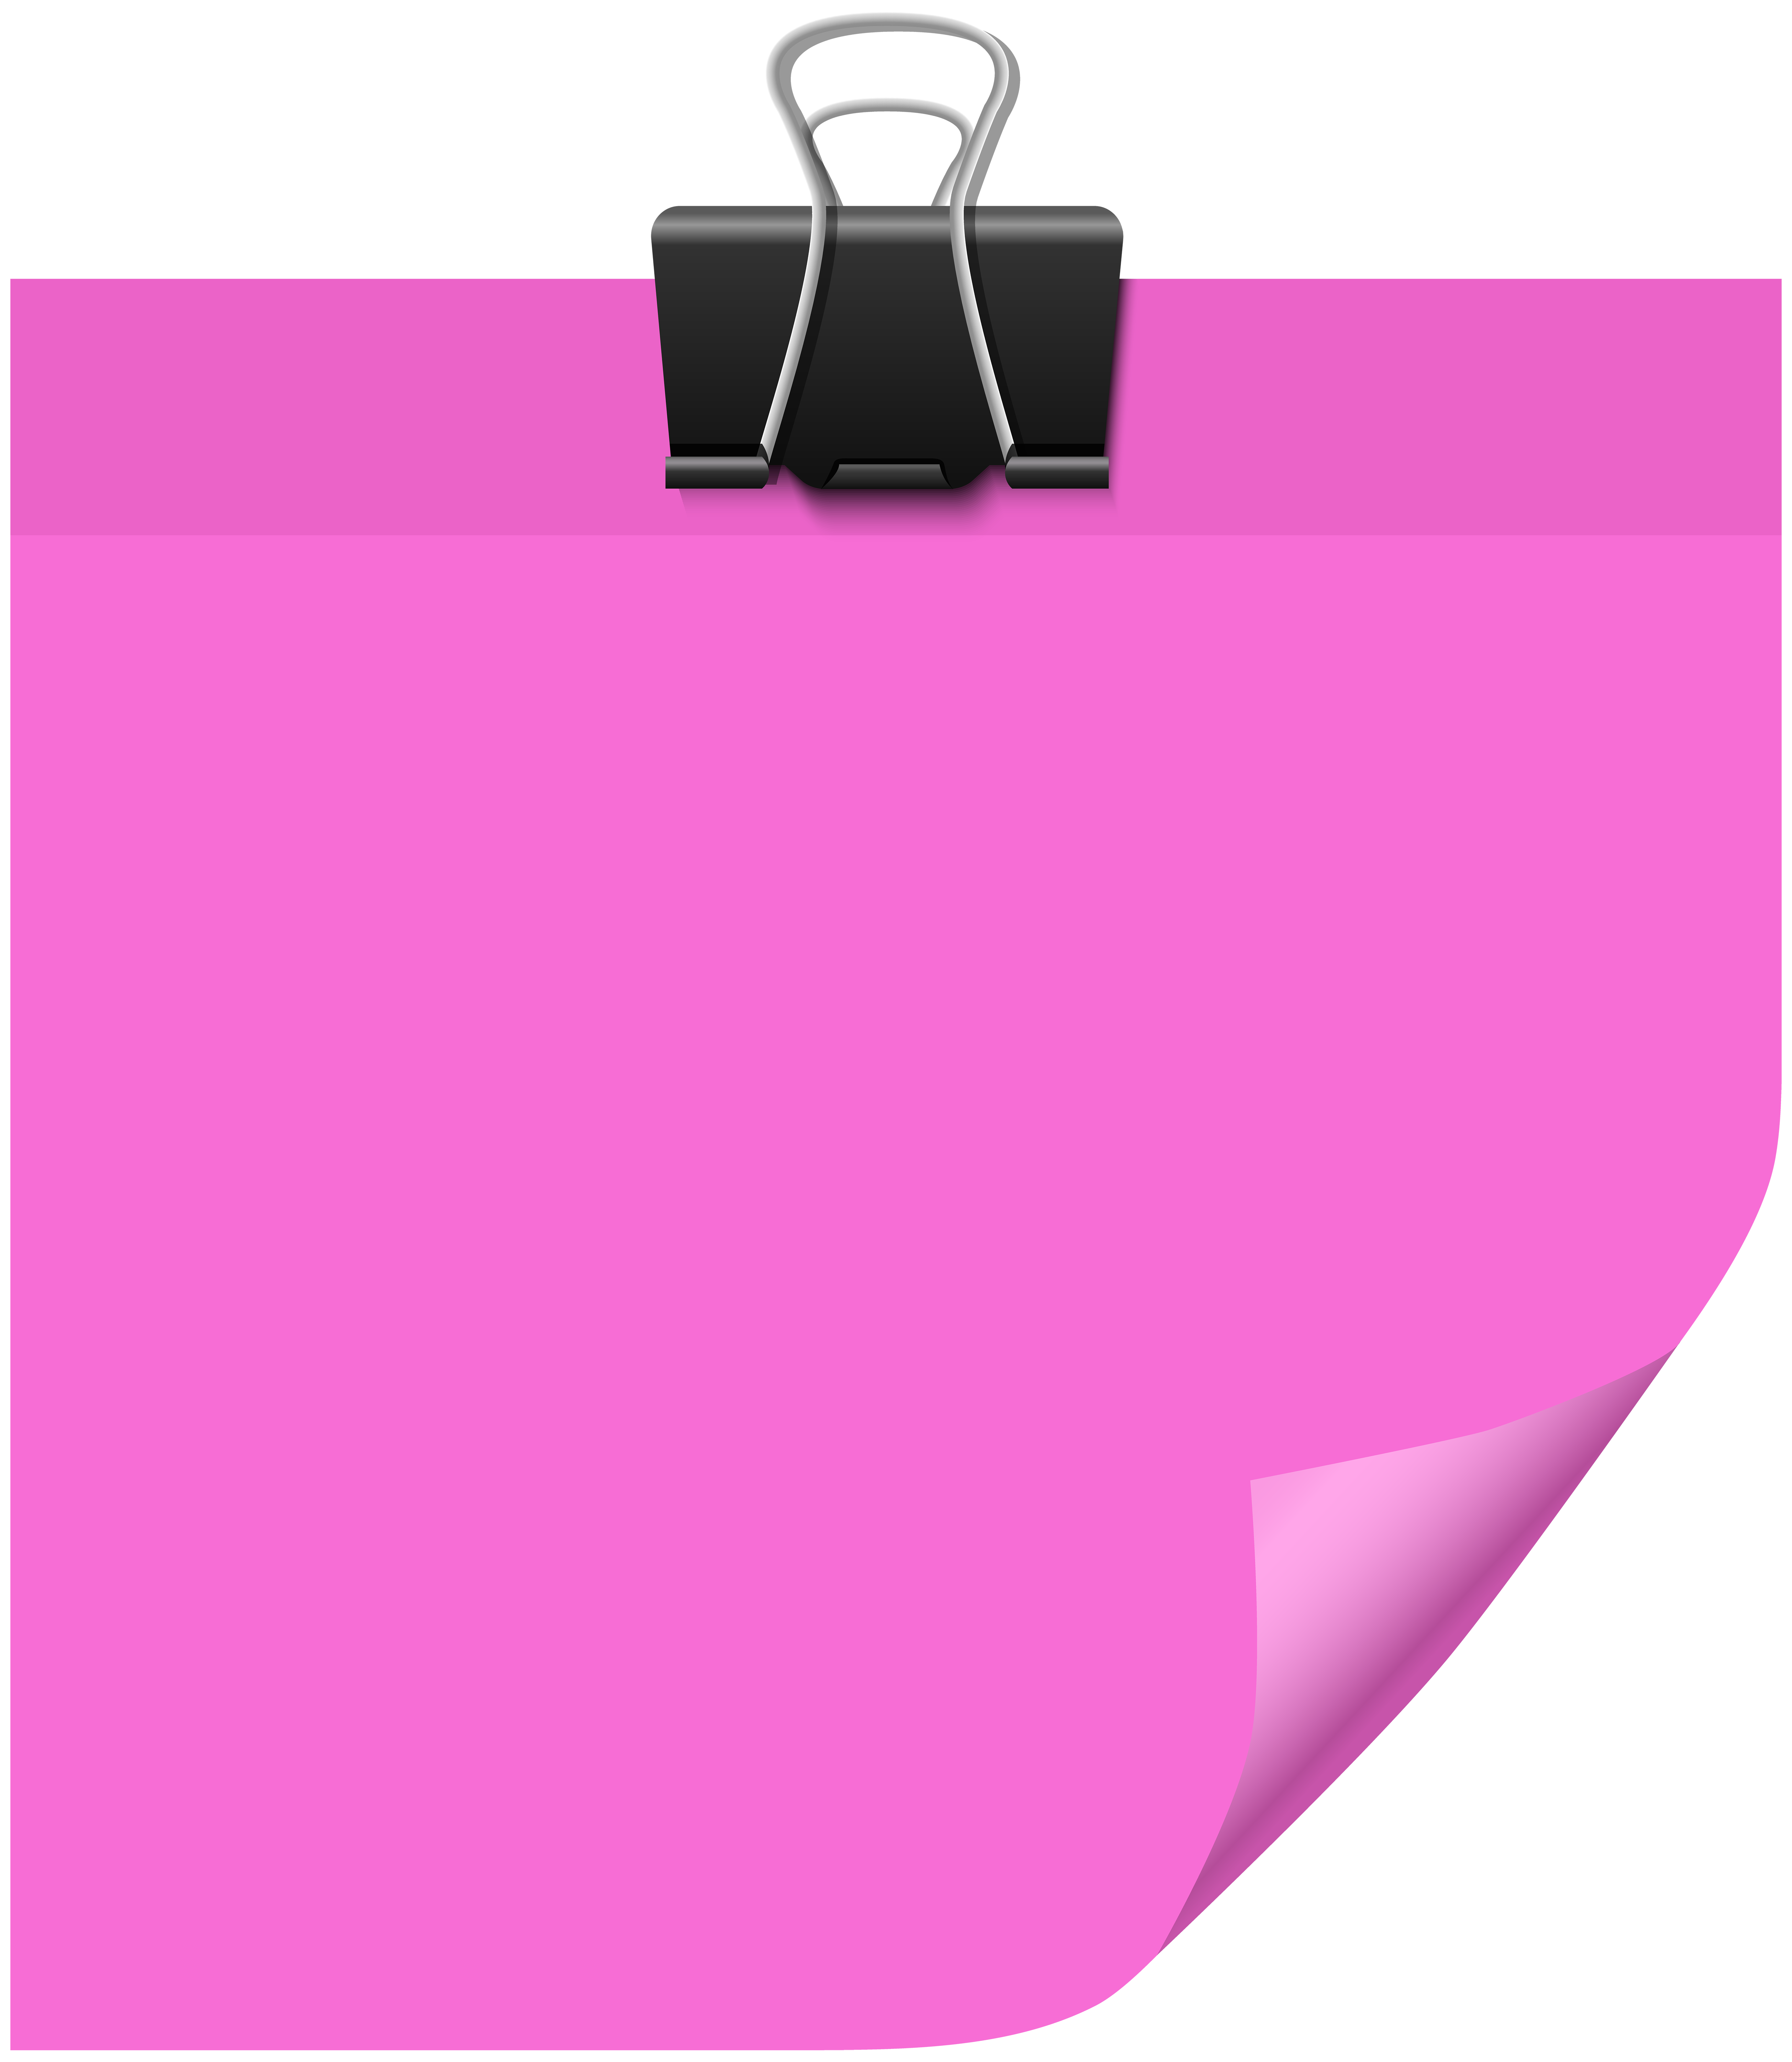 pink post it png